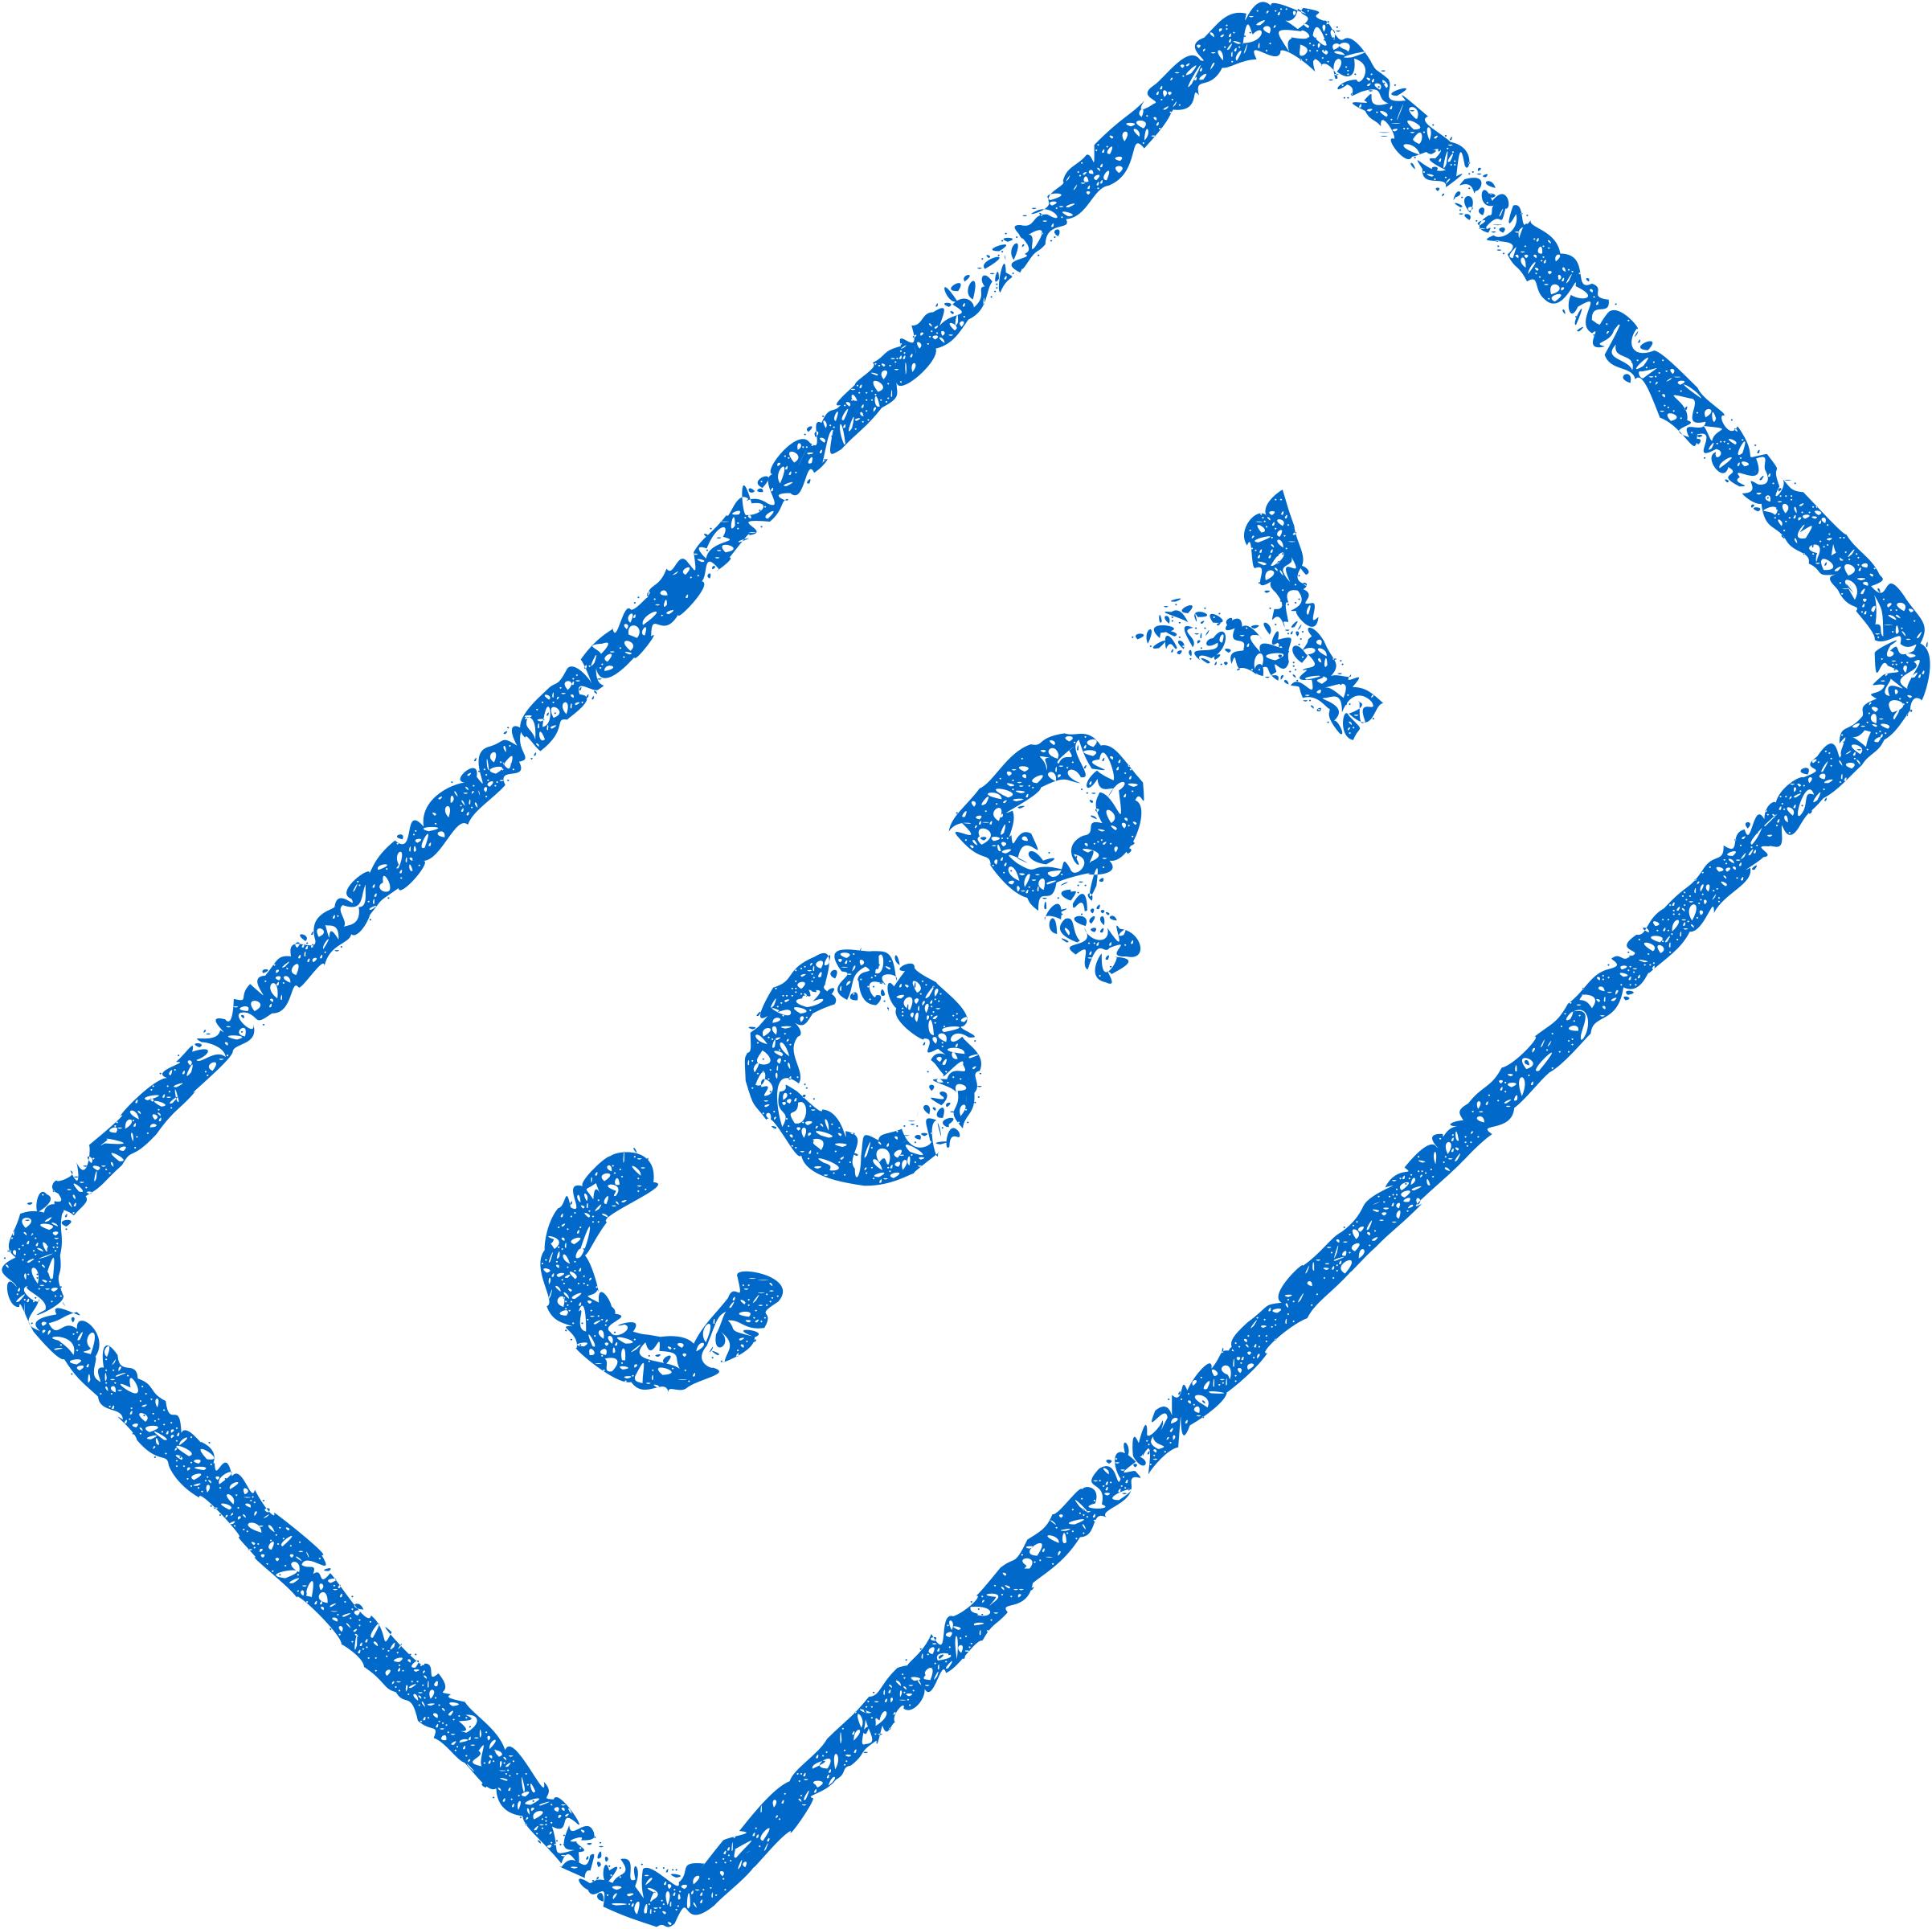 Copy Business Stamp 2 png